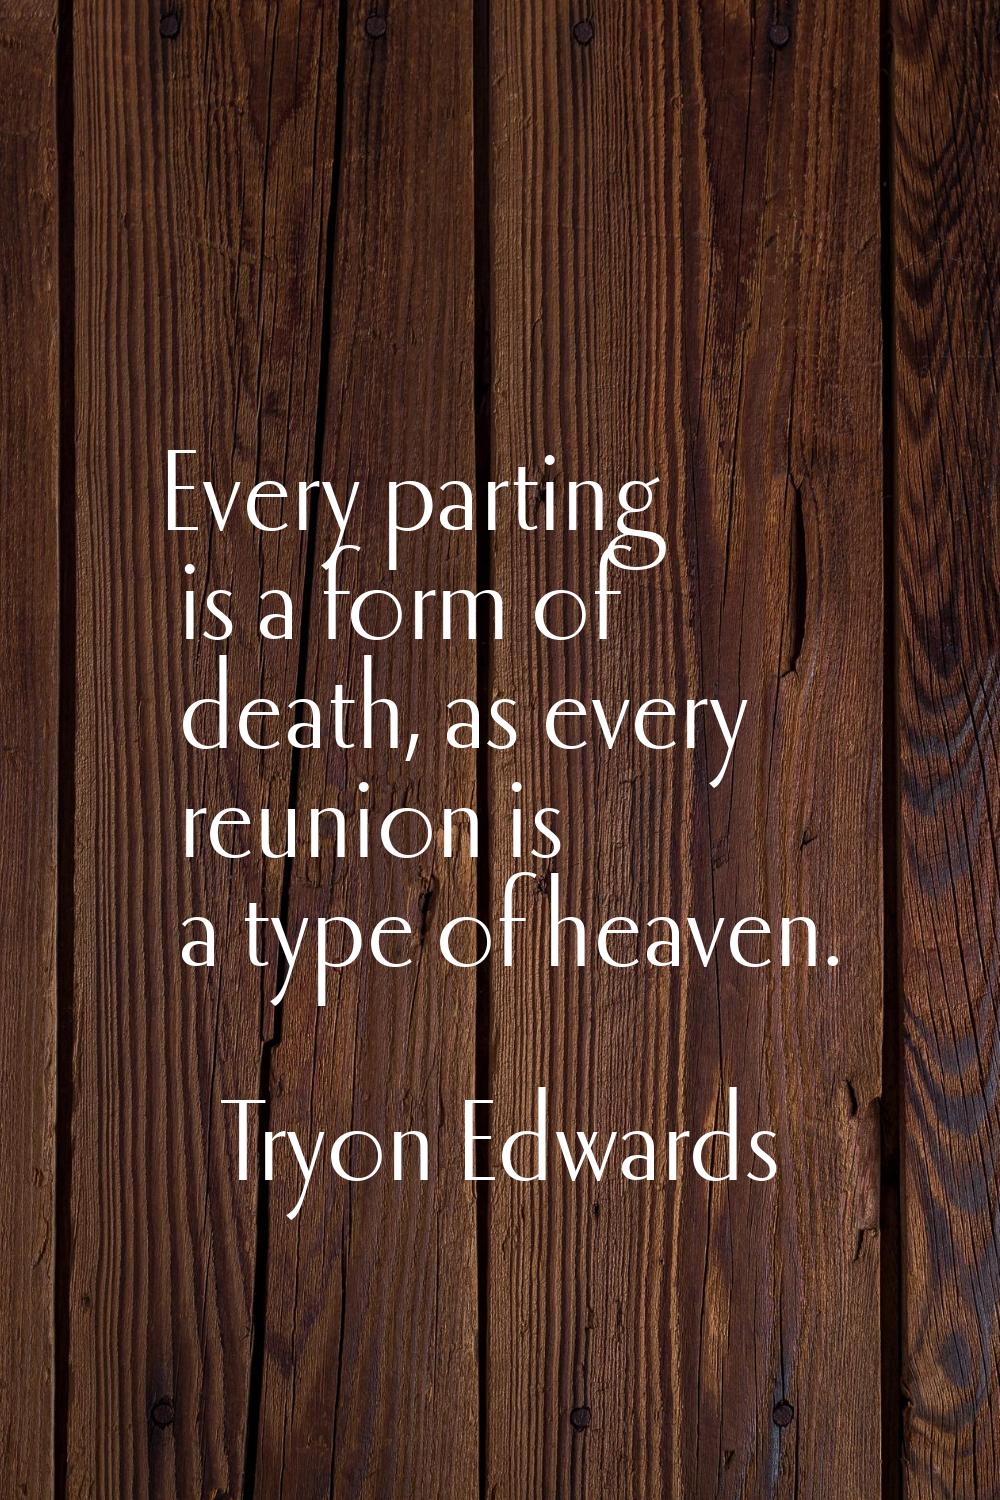 Every parting is a form of death, as every reunion is a type of heaven.